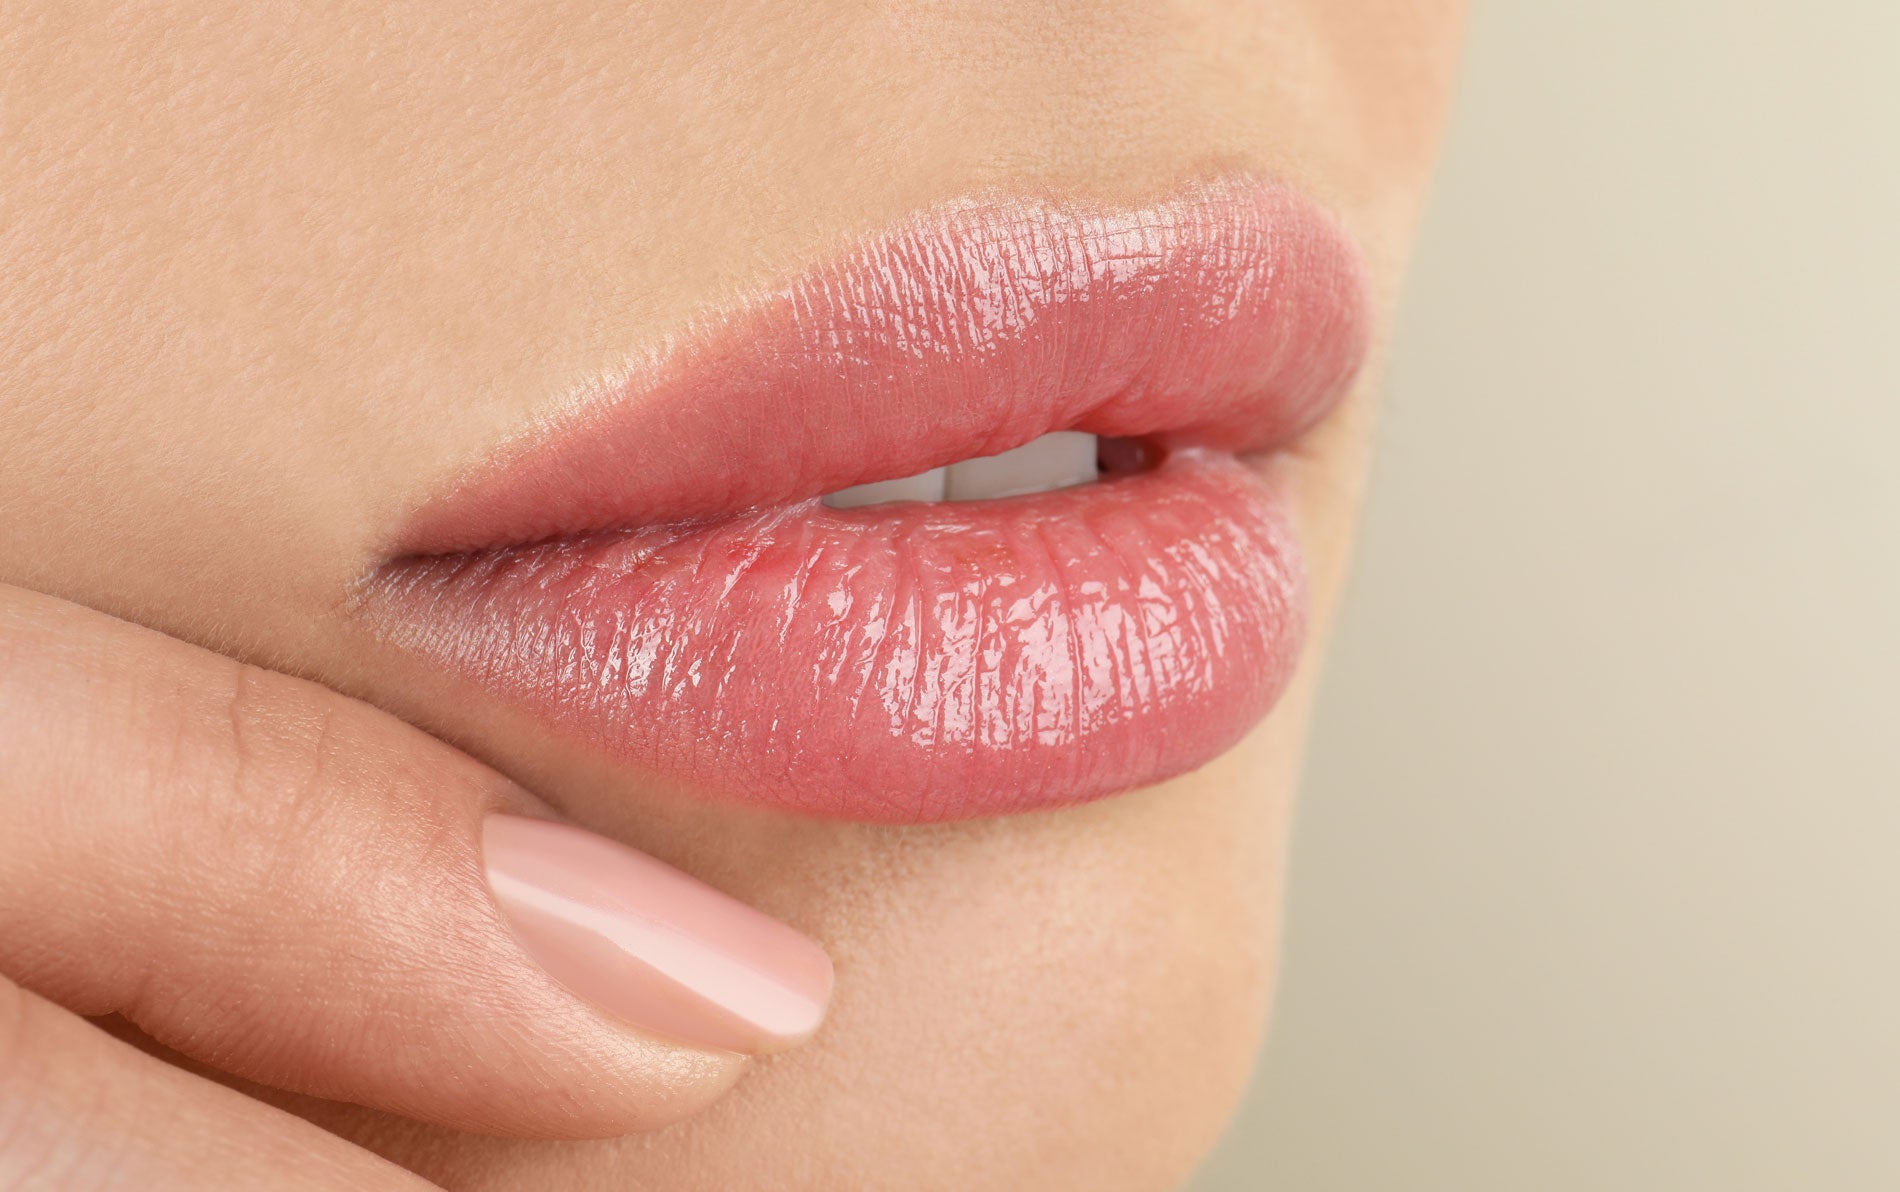 Lip Care 101: 4 Tips to Healthy | Whish